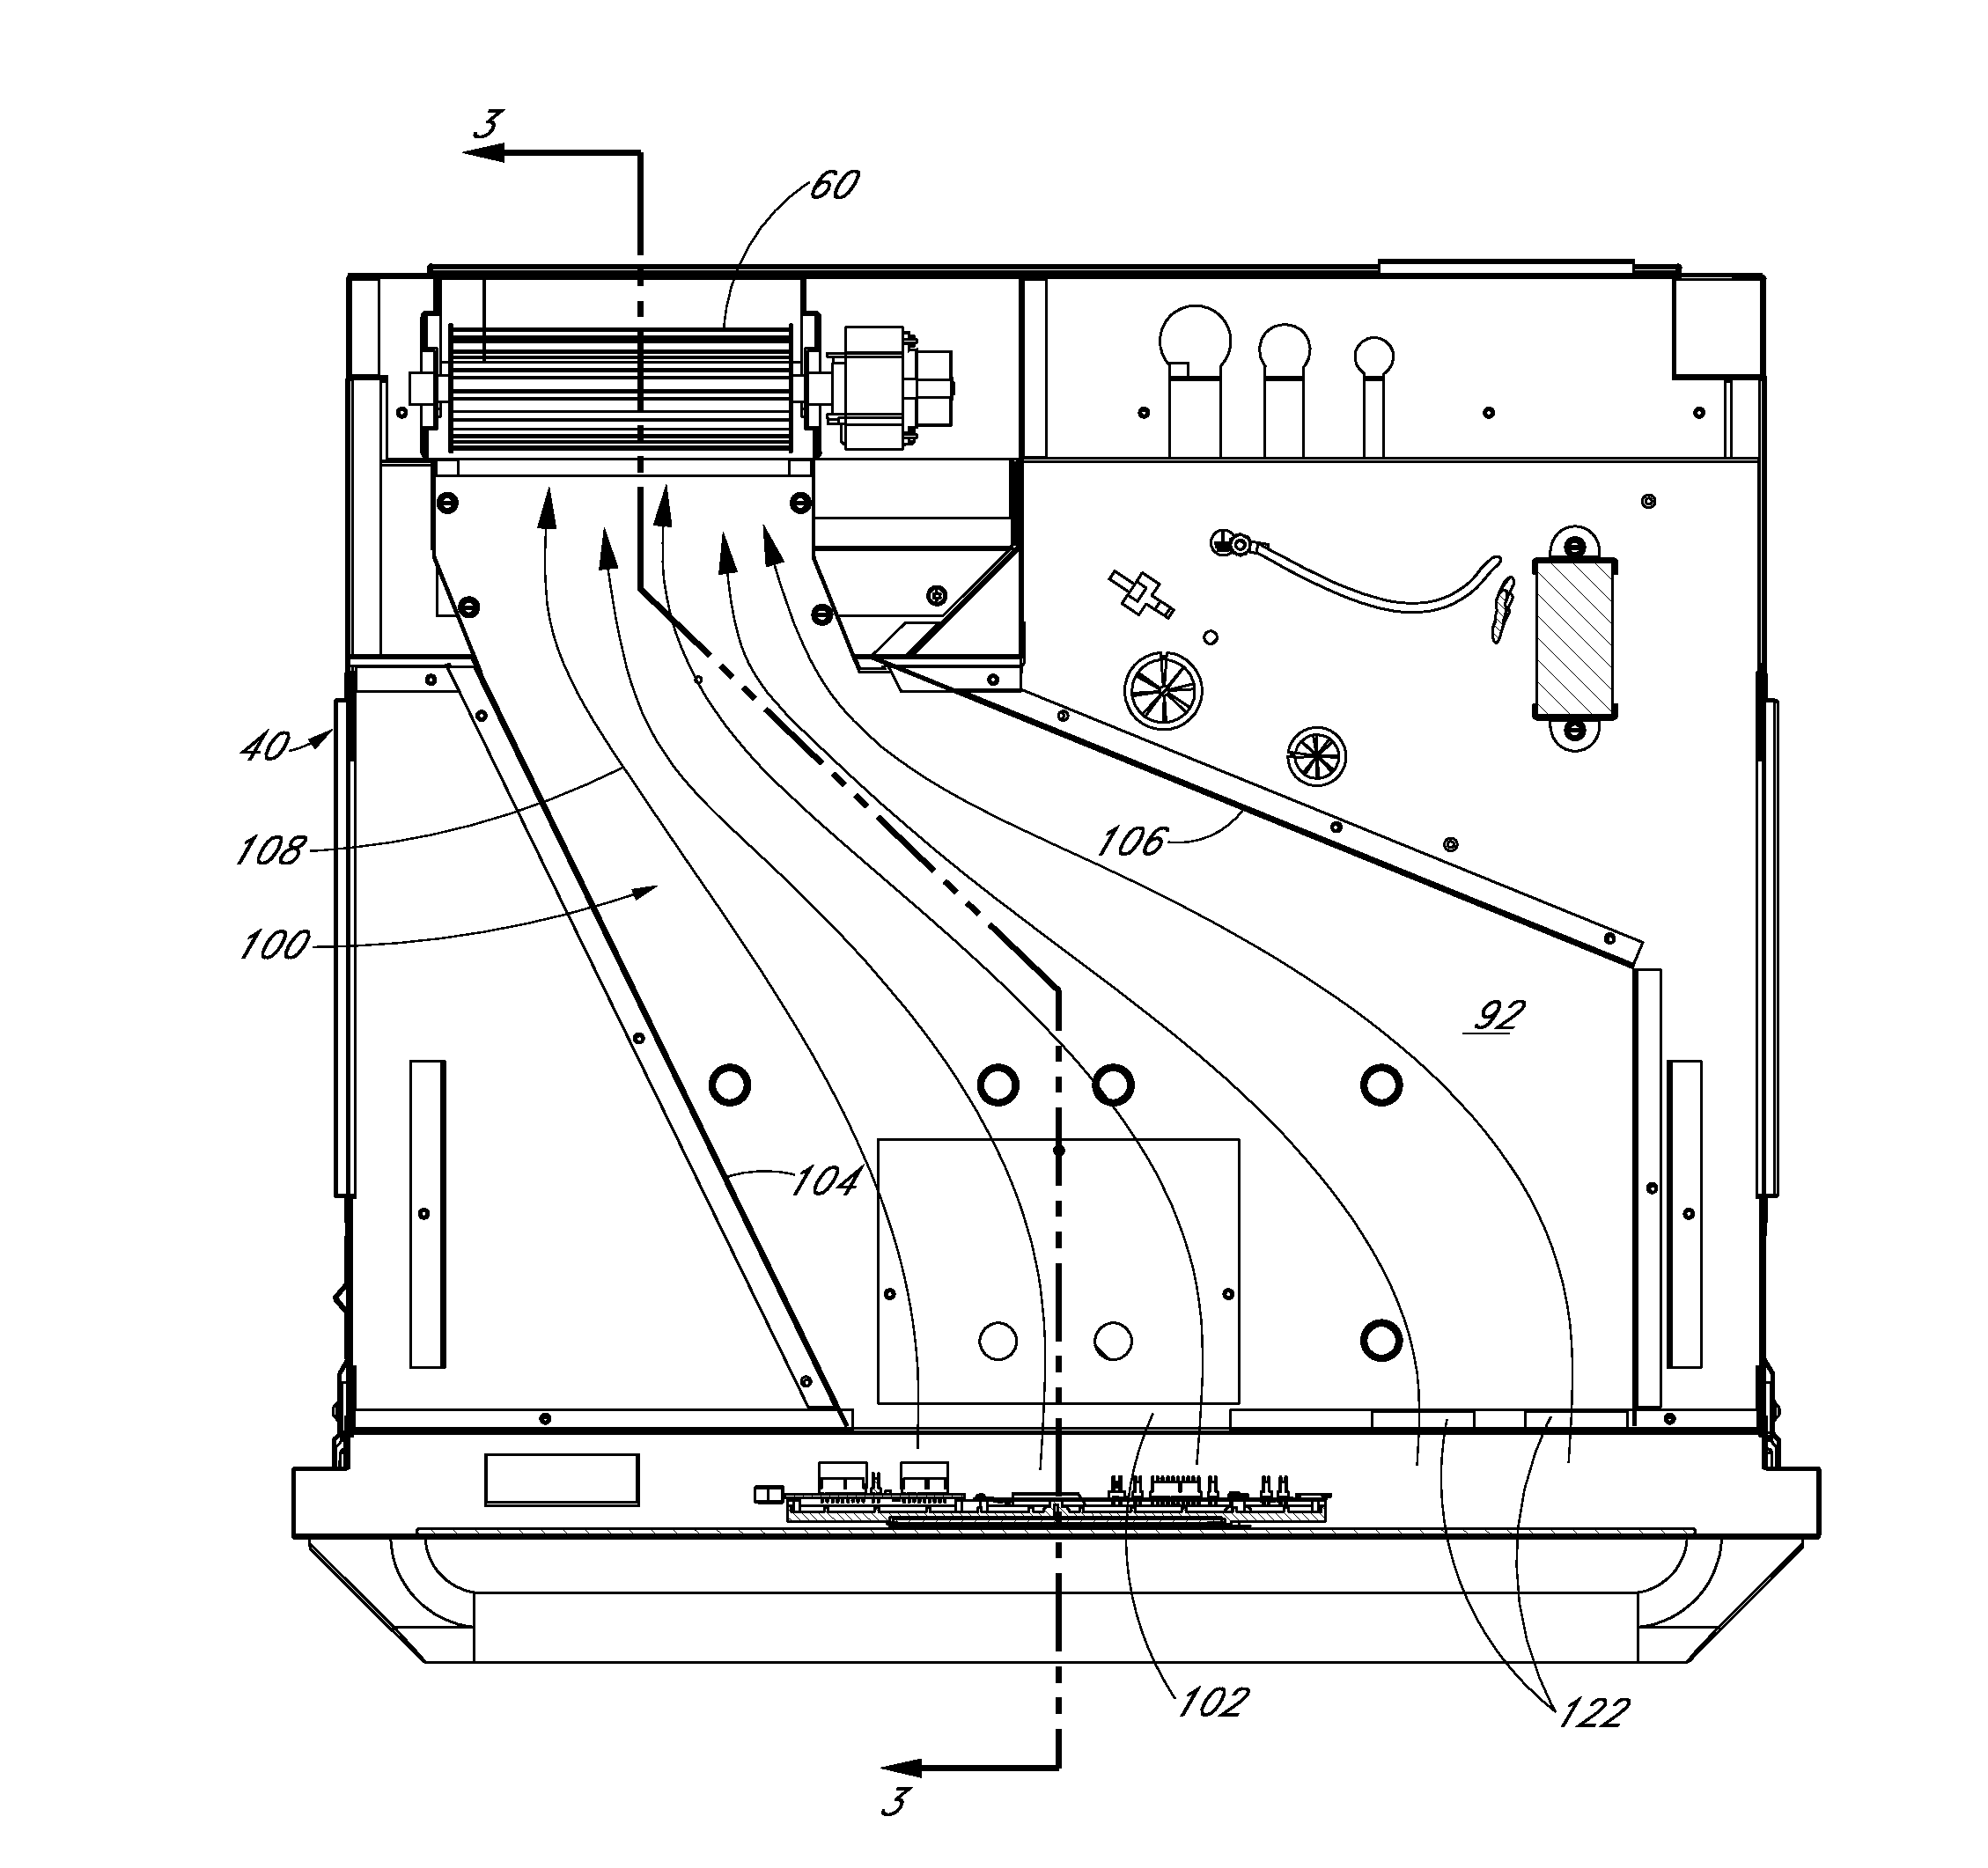 Oven with control panel cooling system